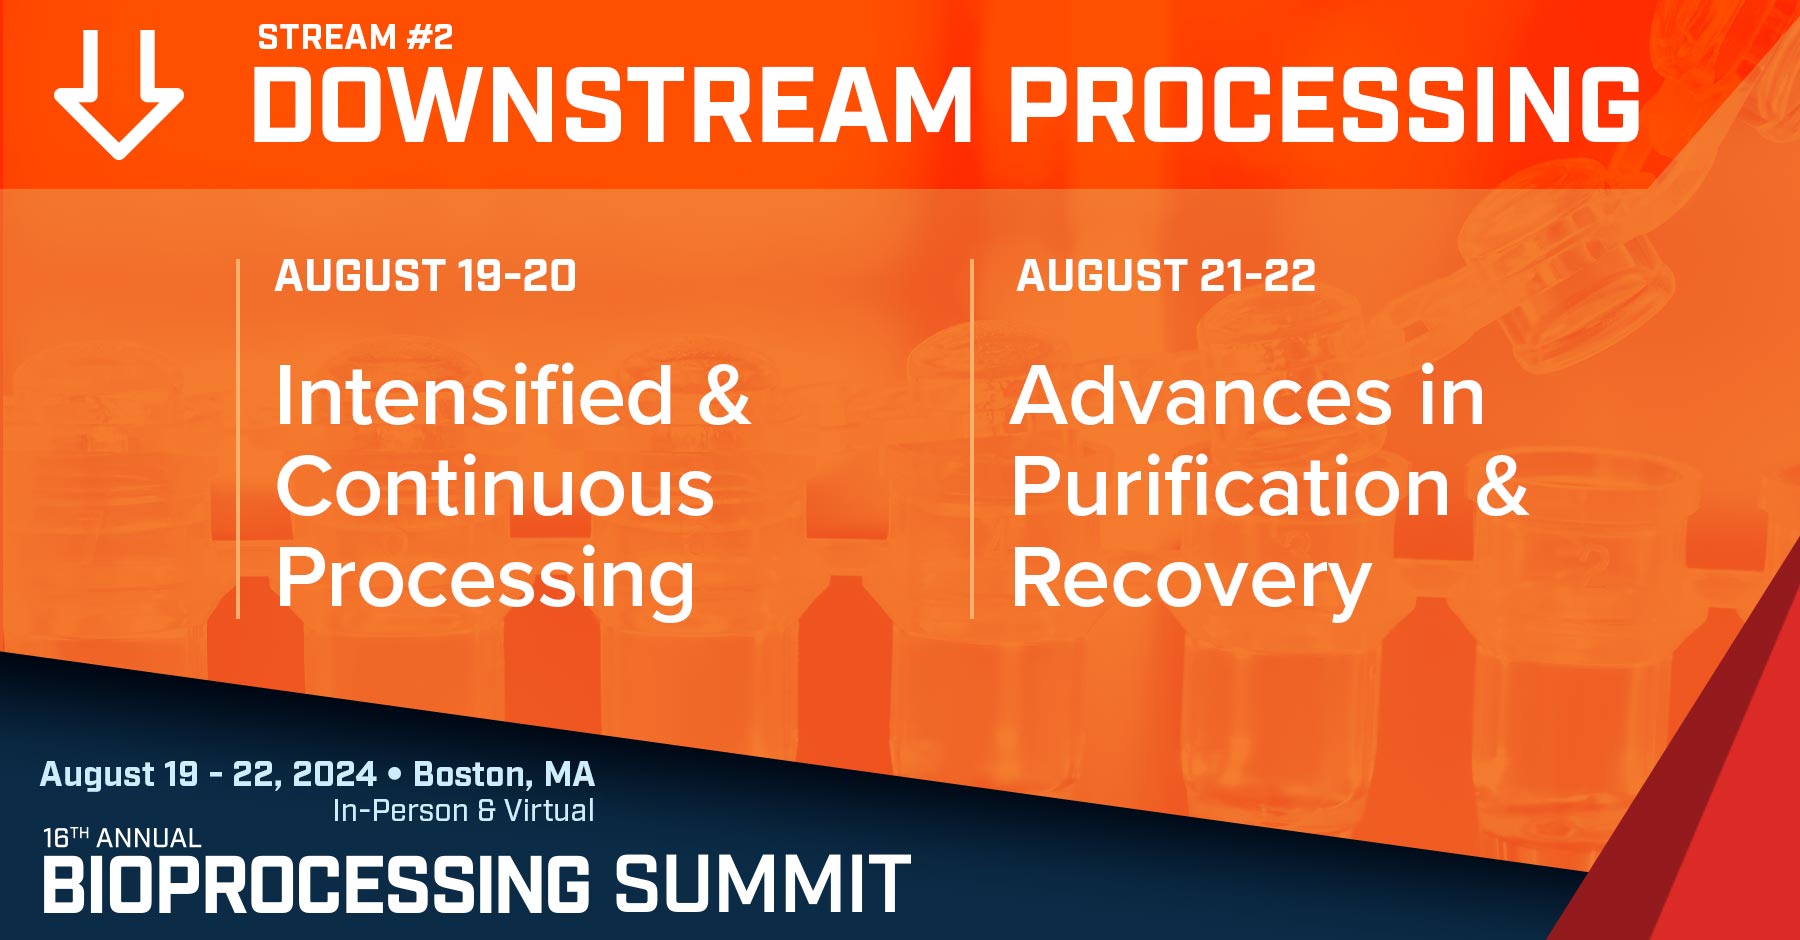 Intensified and Continuous Bioprocessing The Bioprocessing Summit